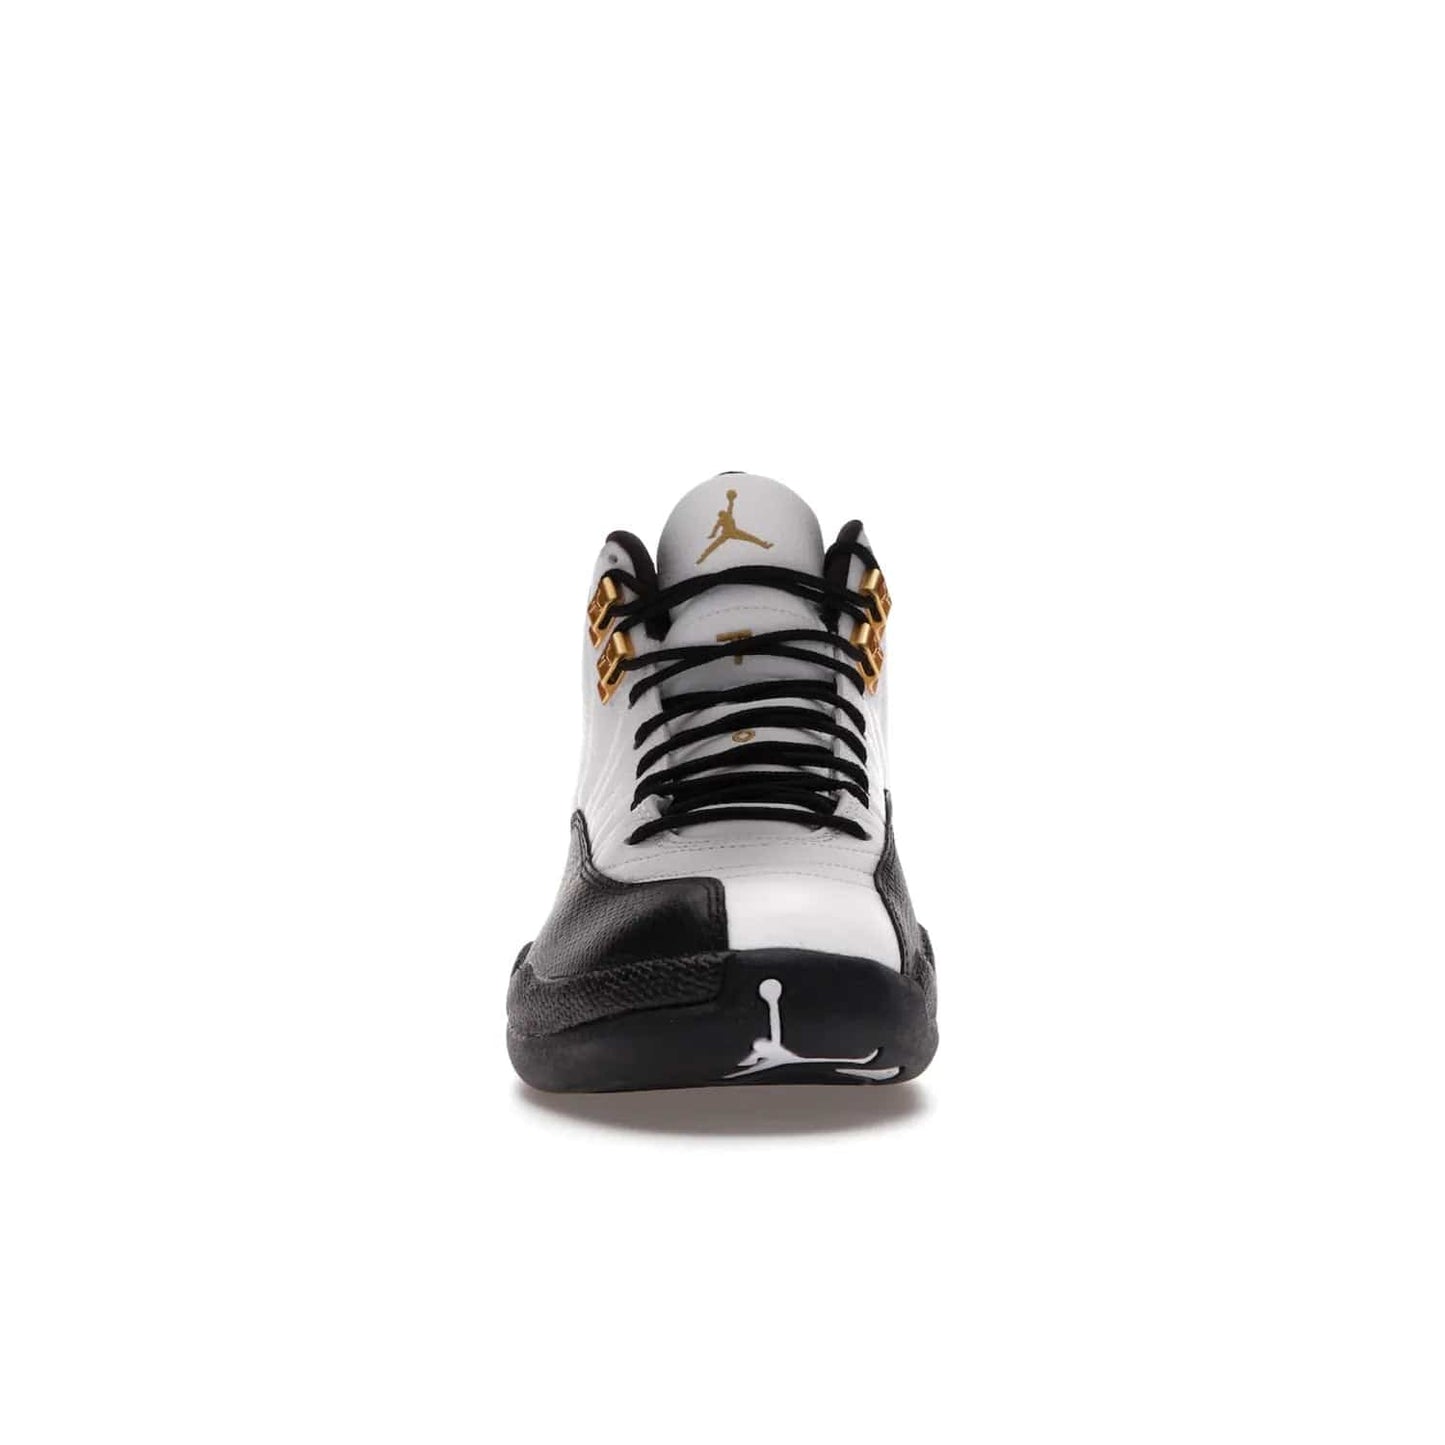 Jordan 12 Retro Royalty Taxi - Image 10 - Only at www.BallersClubKickz.com - Make a statement with the Air Jordan 12 Retro Royalty Taxi. Woven heel tag, gold plaquet, white tumbled leather upper plus a black toe wrap, make this modern take on the classic a must-have. Available in November 2021.